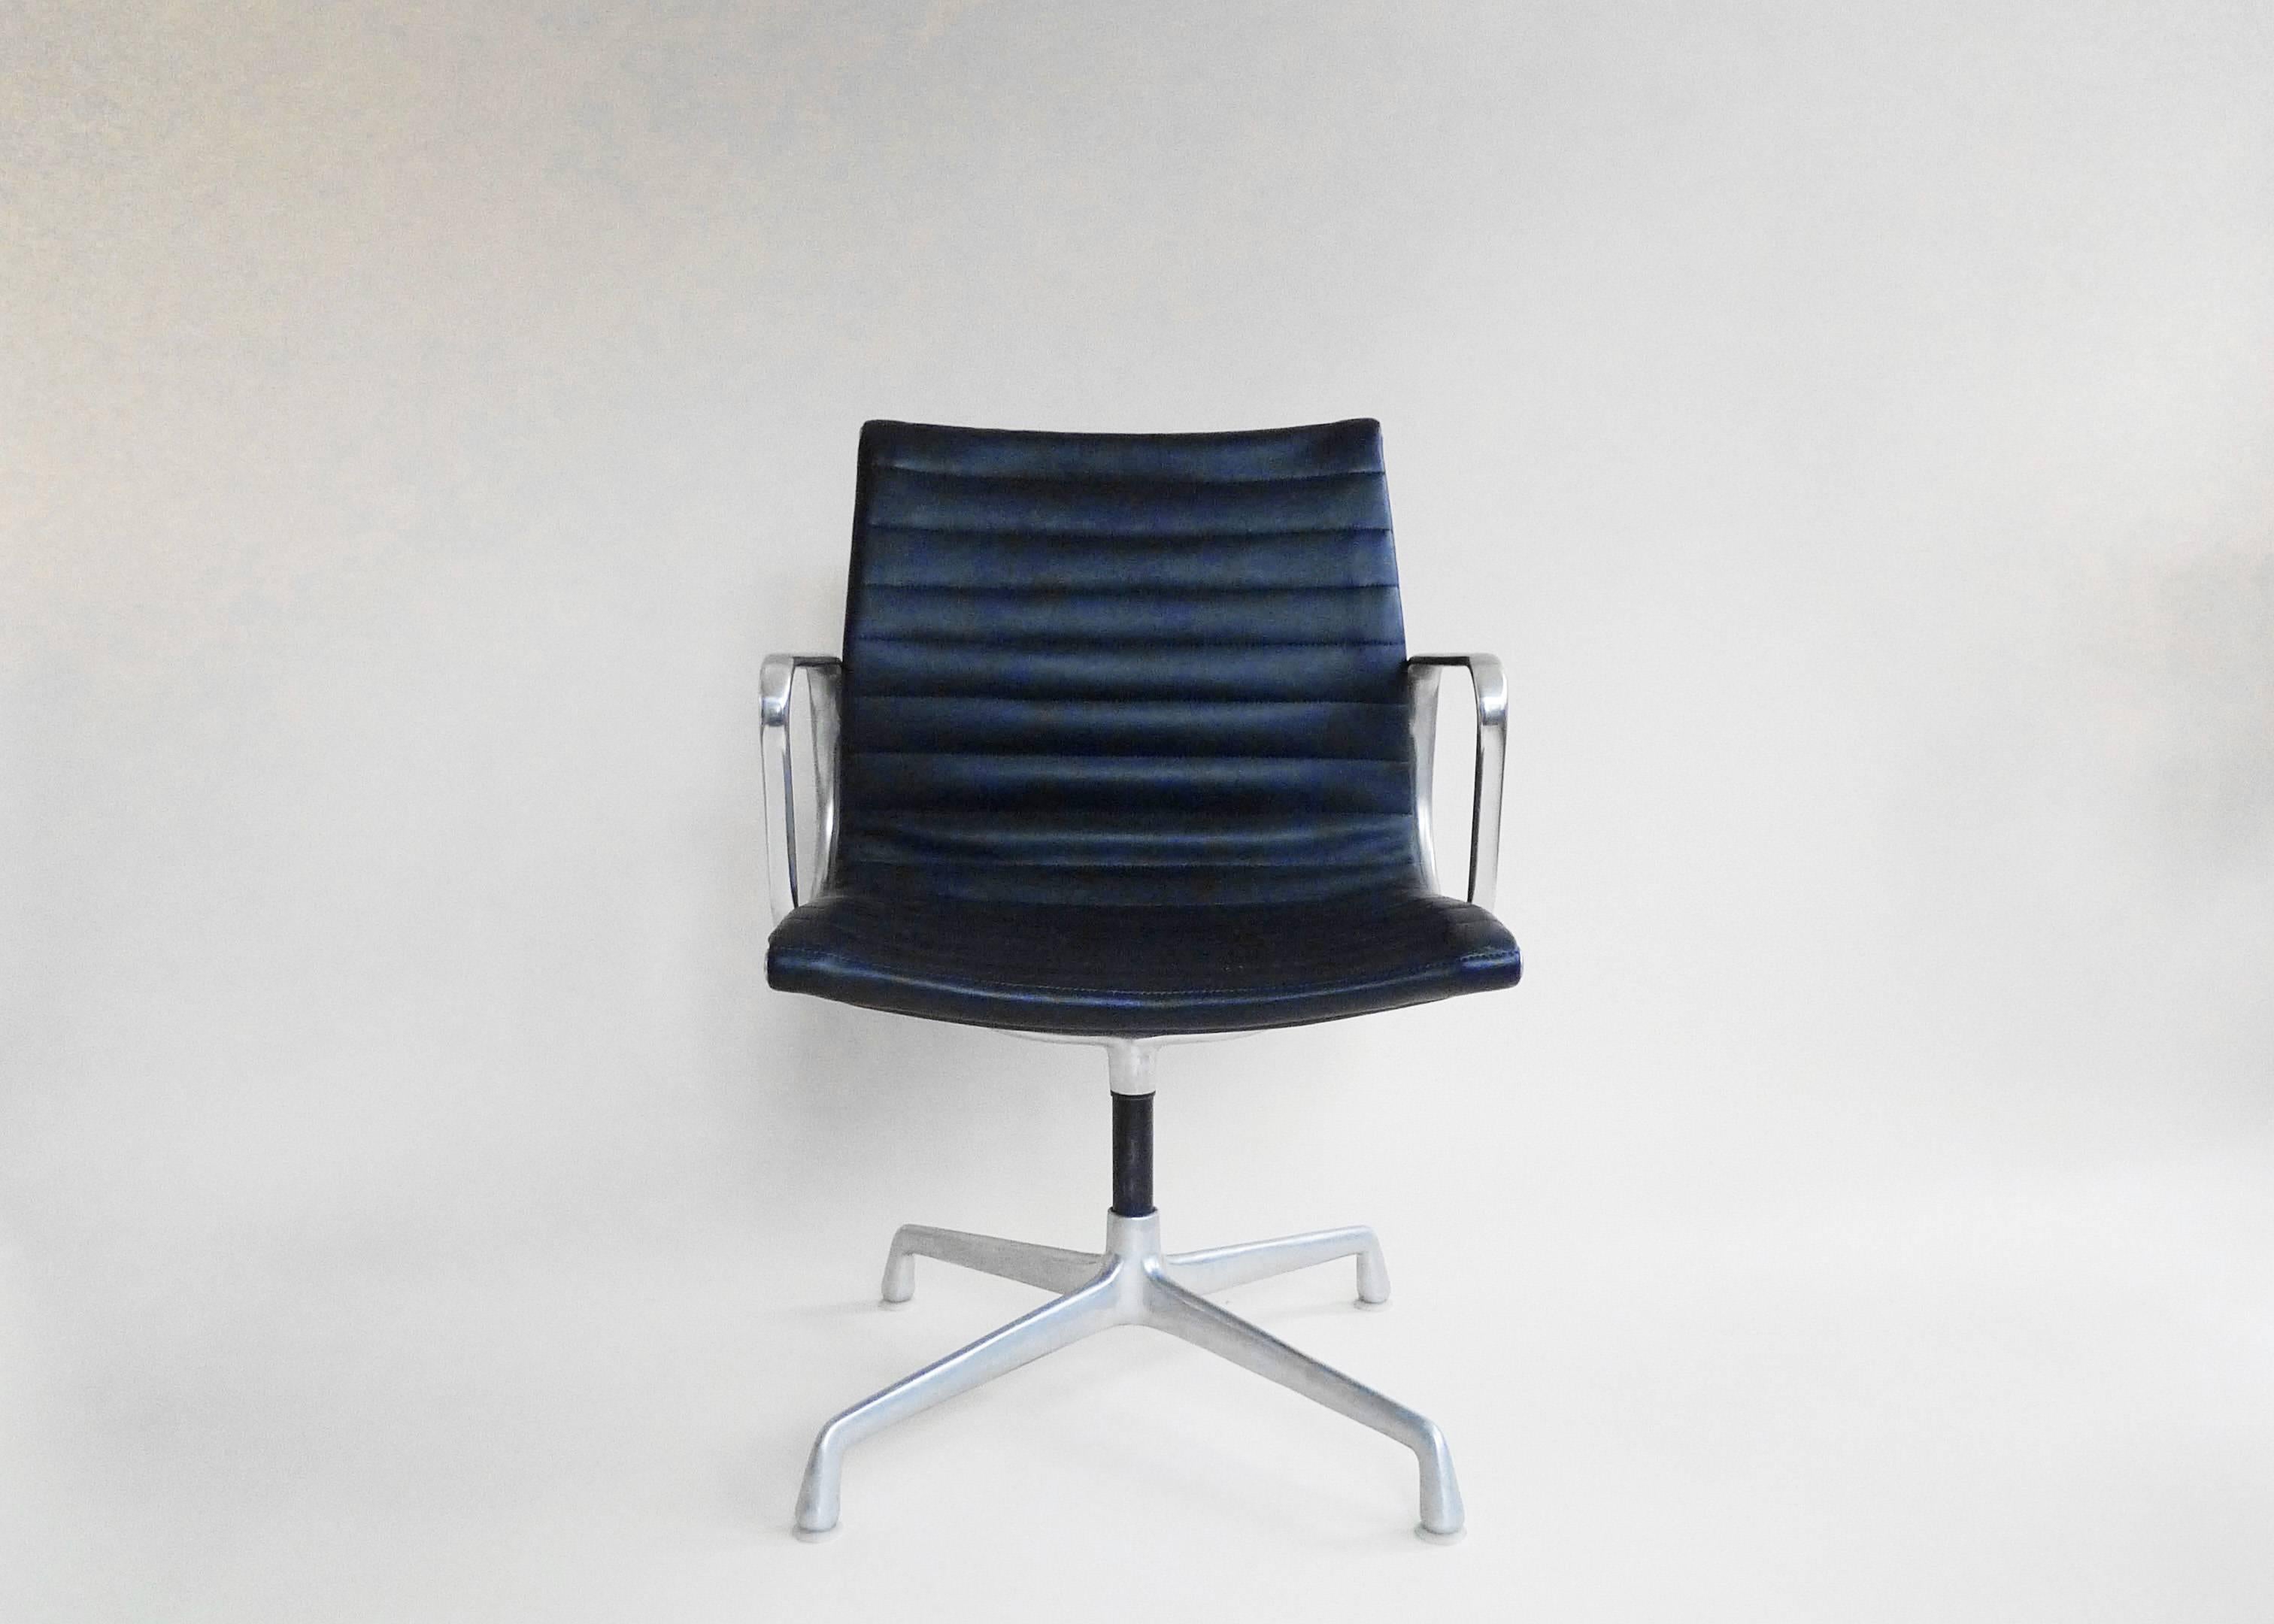 A set of four eames aluminum group chairs, original from an office building in Catskill, NY. Four star base with aluminum and black upholstery in very good condition. Cast Herman Miller imprint on each chair.